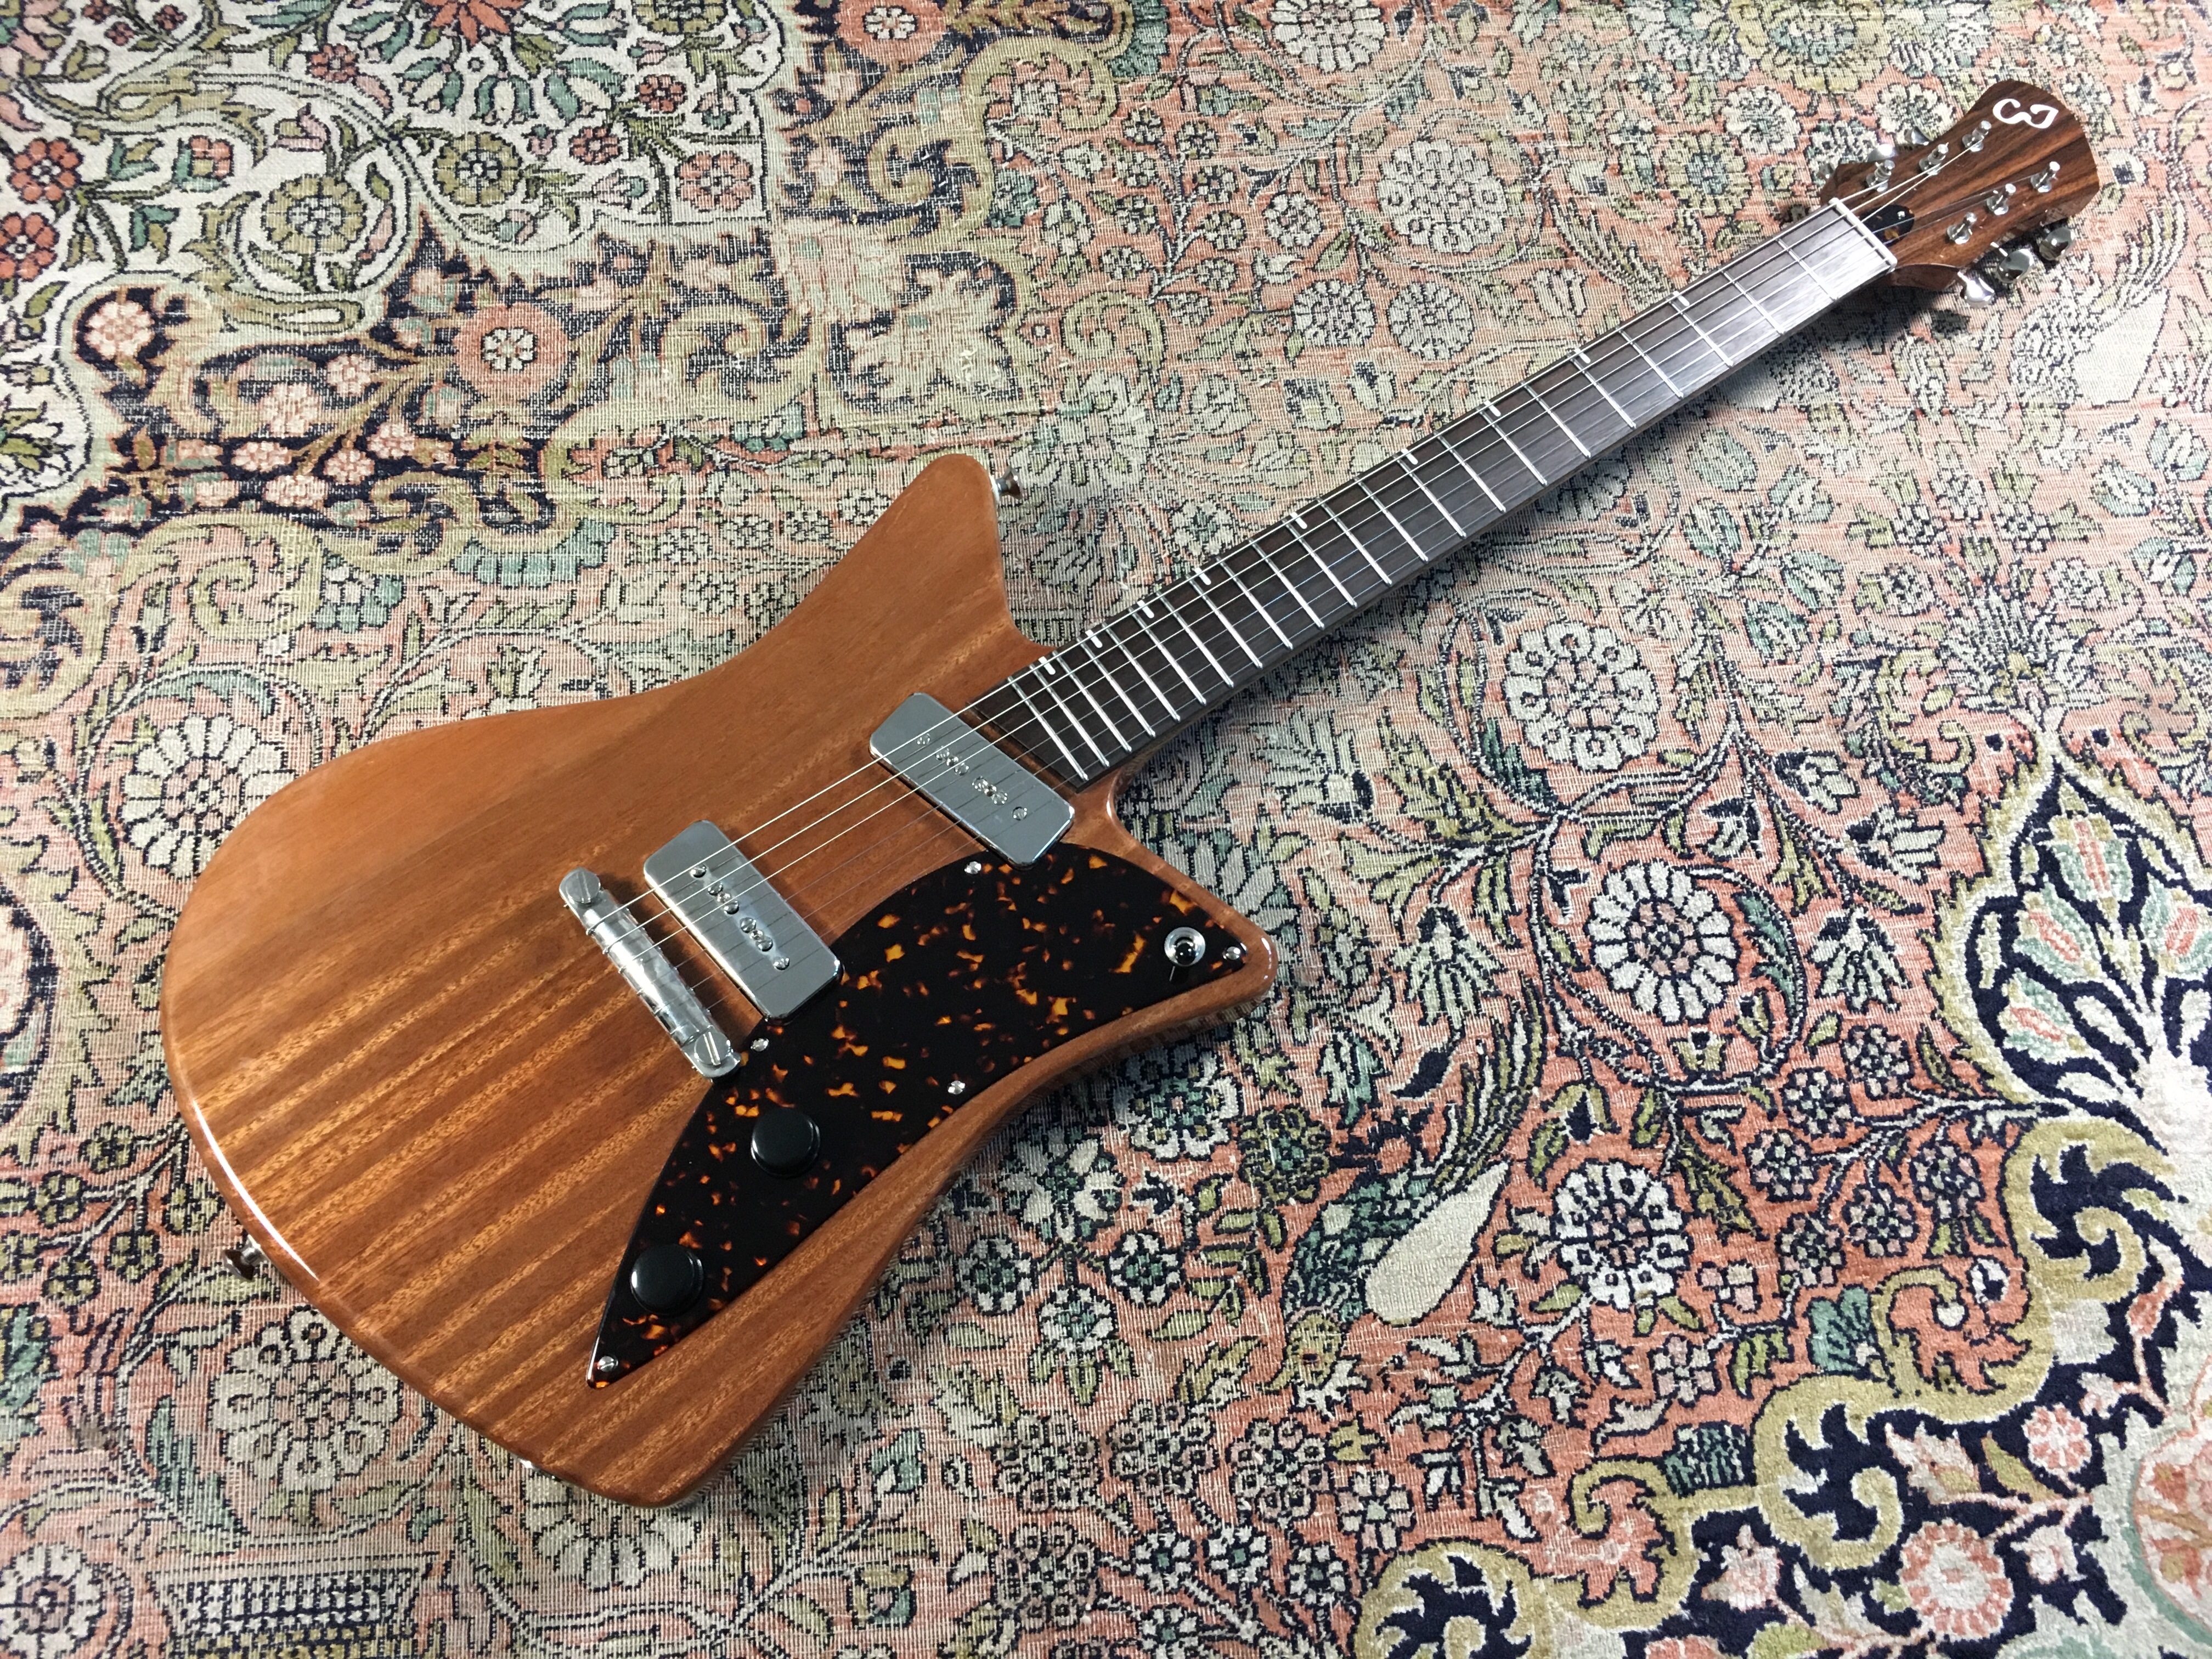 Guitar Review - Raccoon model from luthier Camille Jacob